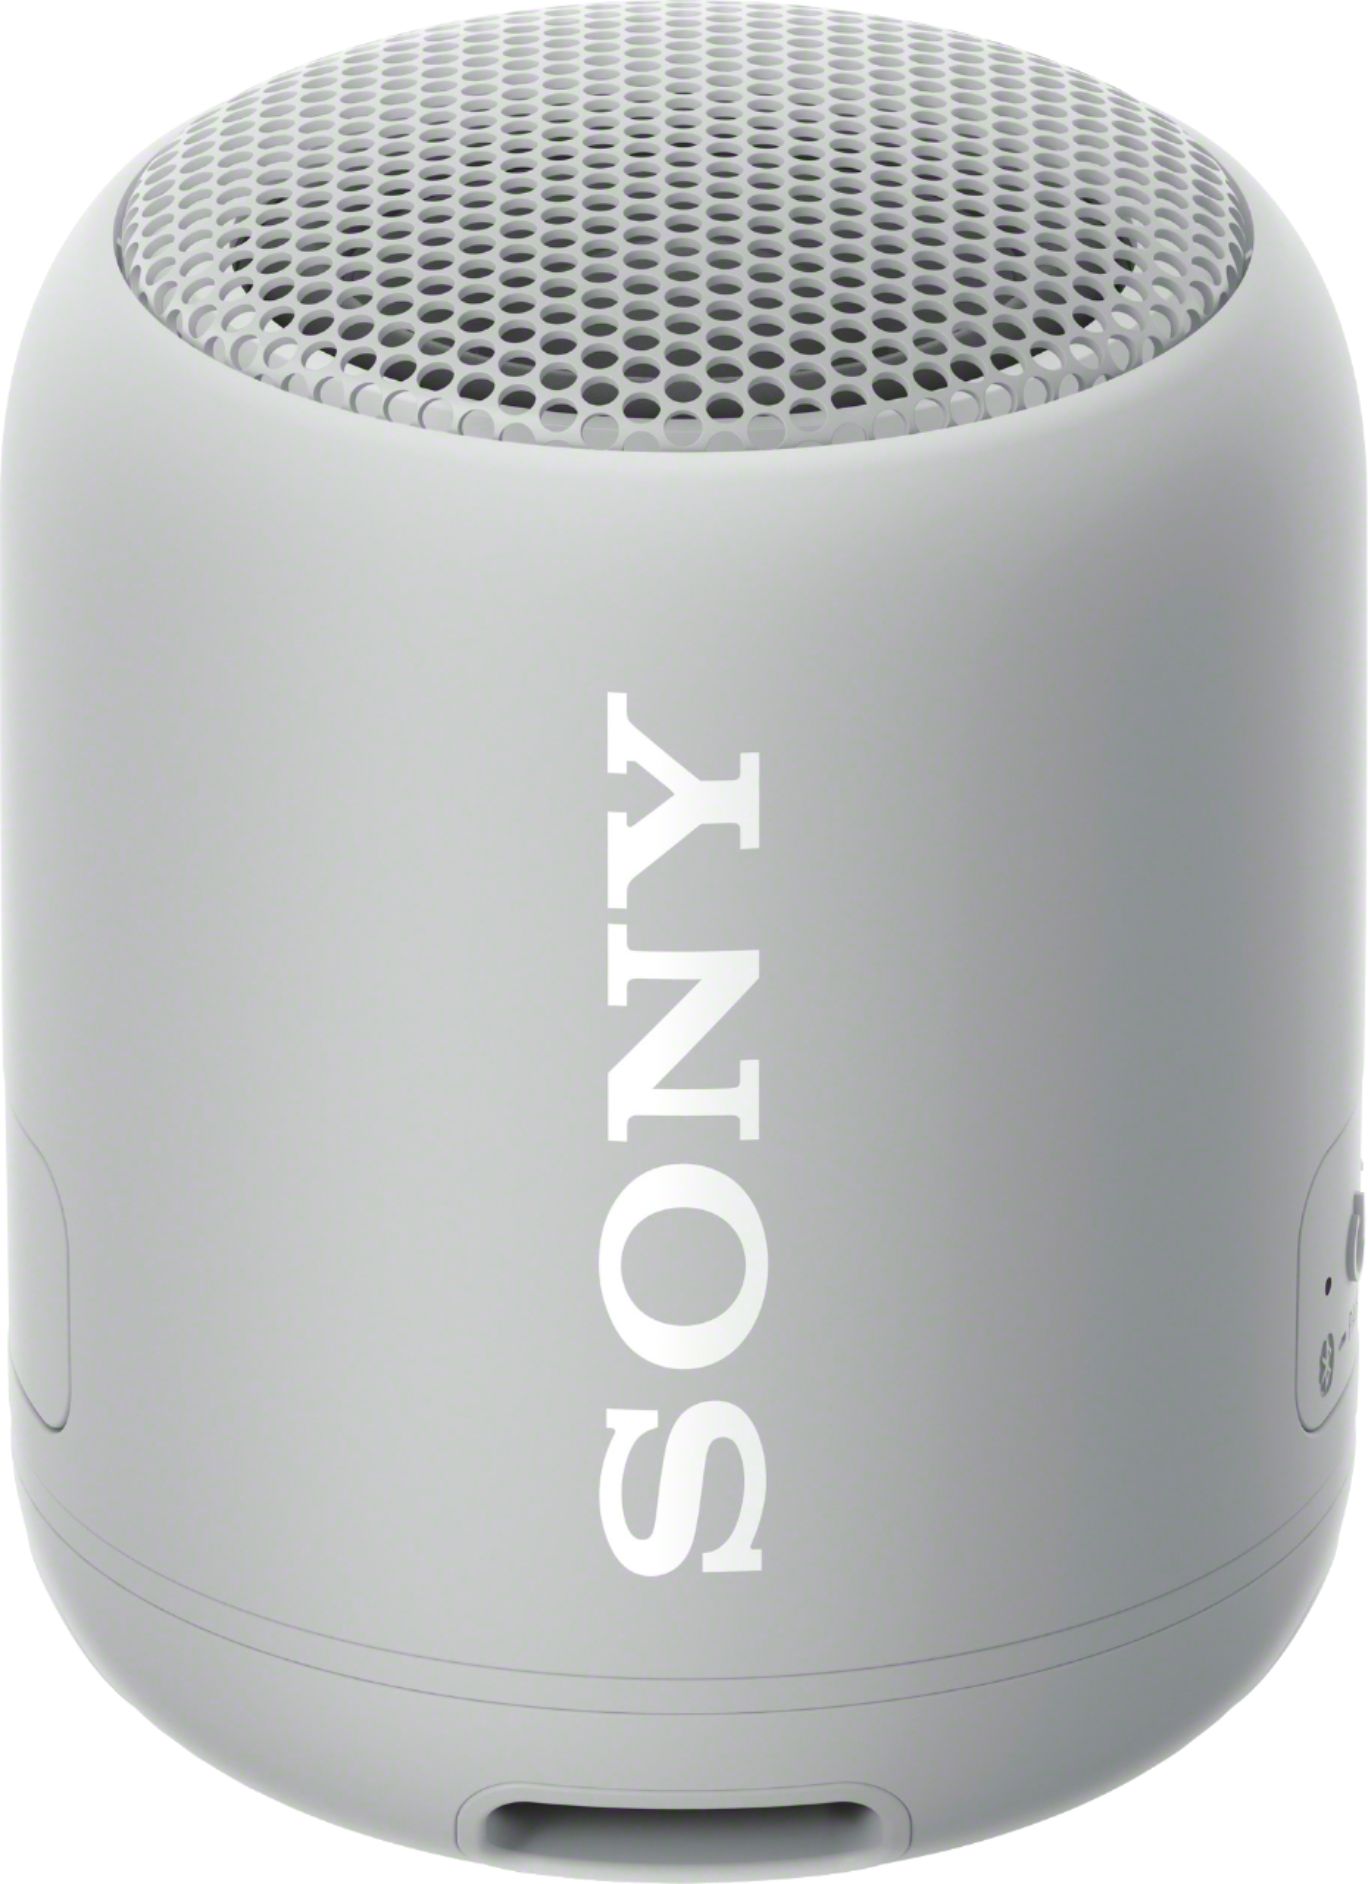 Sony Compact and Portable Waterproof Wireless Speaker with Extra BASS Lilac 